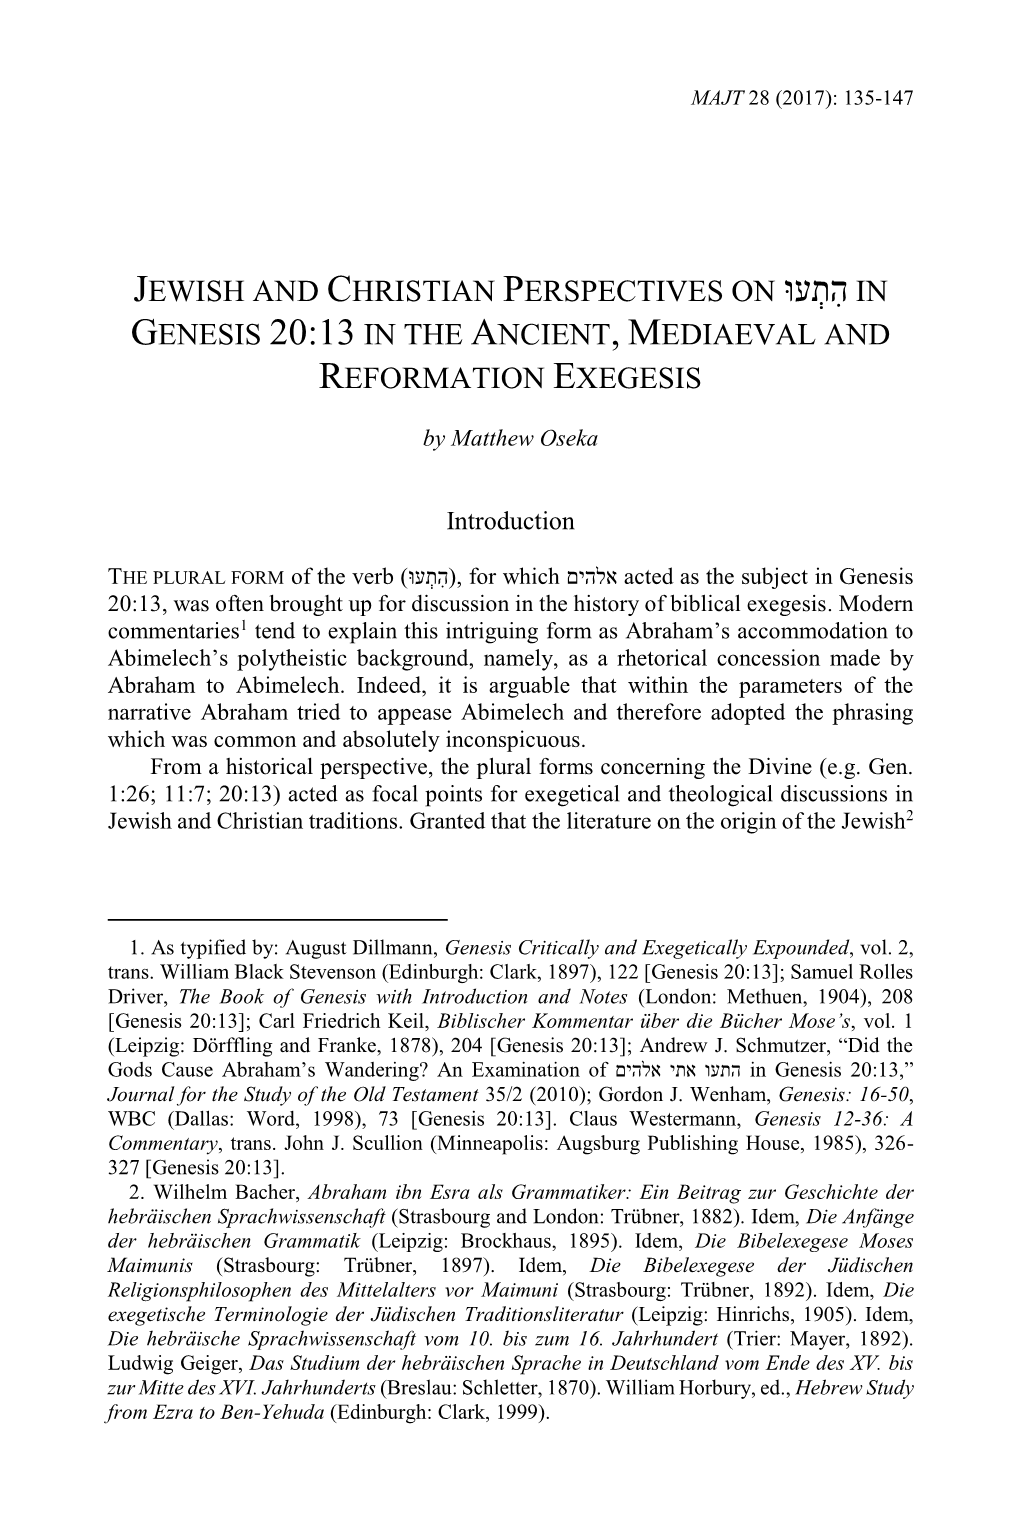 Jewish and Christian Perspectives on ??????? in Genesis 20:13 in the Ancient, Mediaeval and Reformed Exegesis